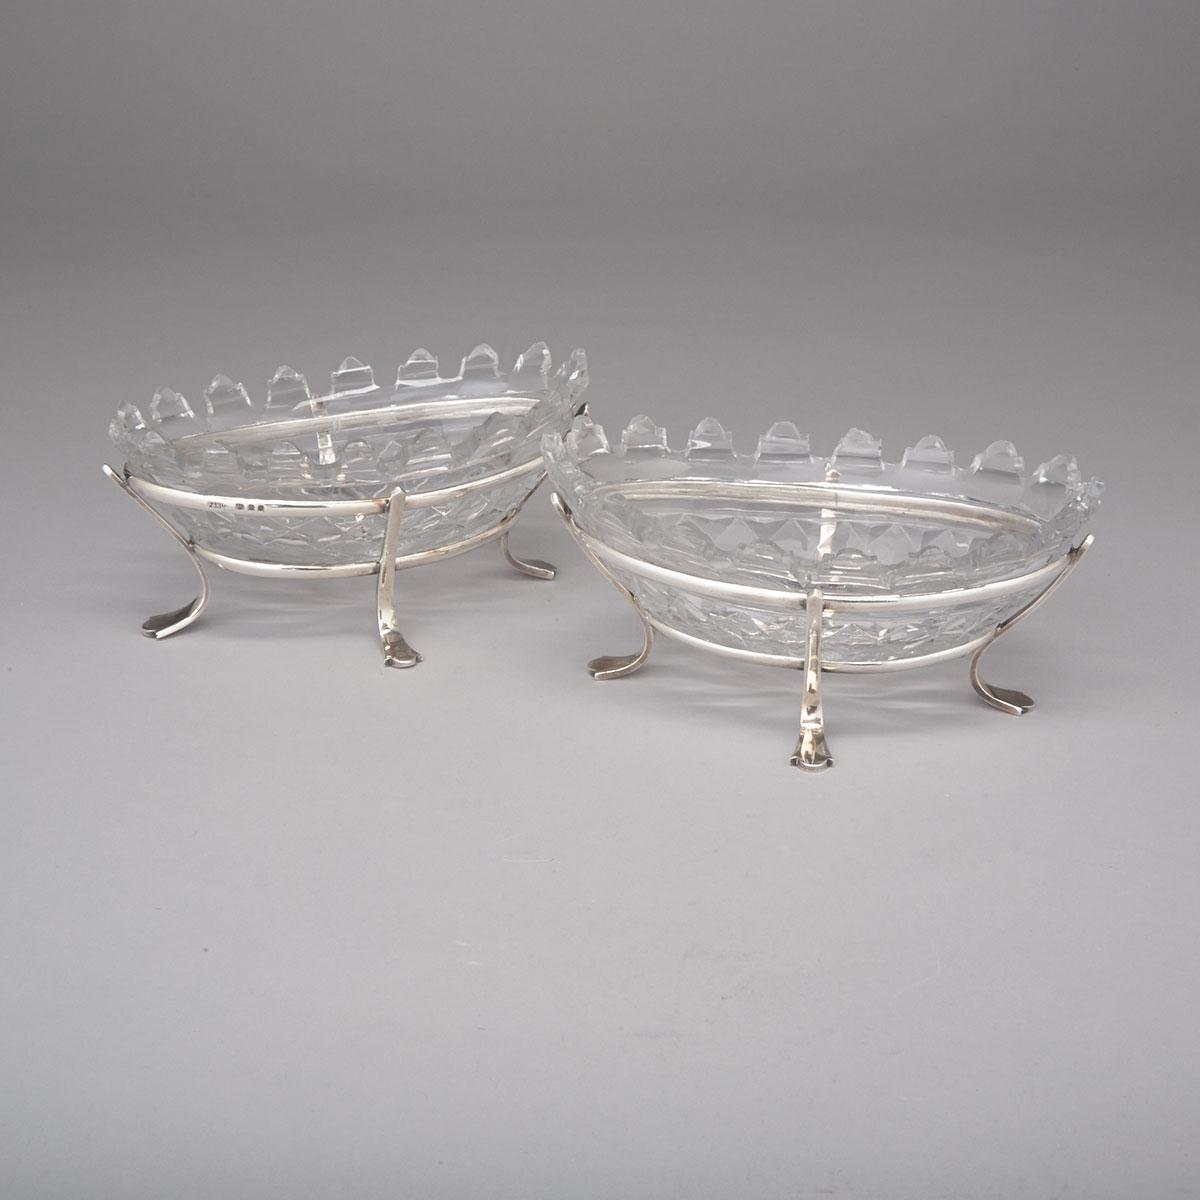 Pair of English Silver Mounted Cut Glass Oval Sweetmeat Dishes, London, 1931